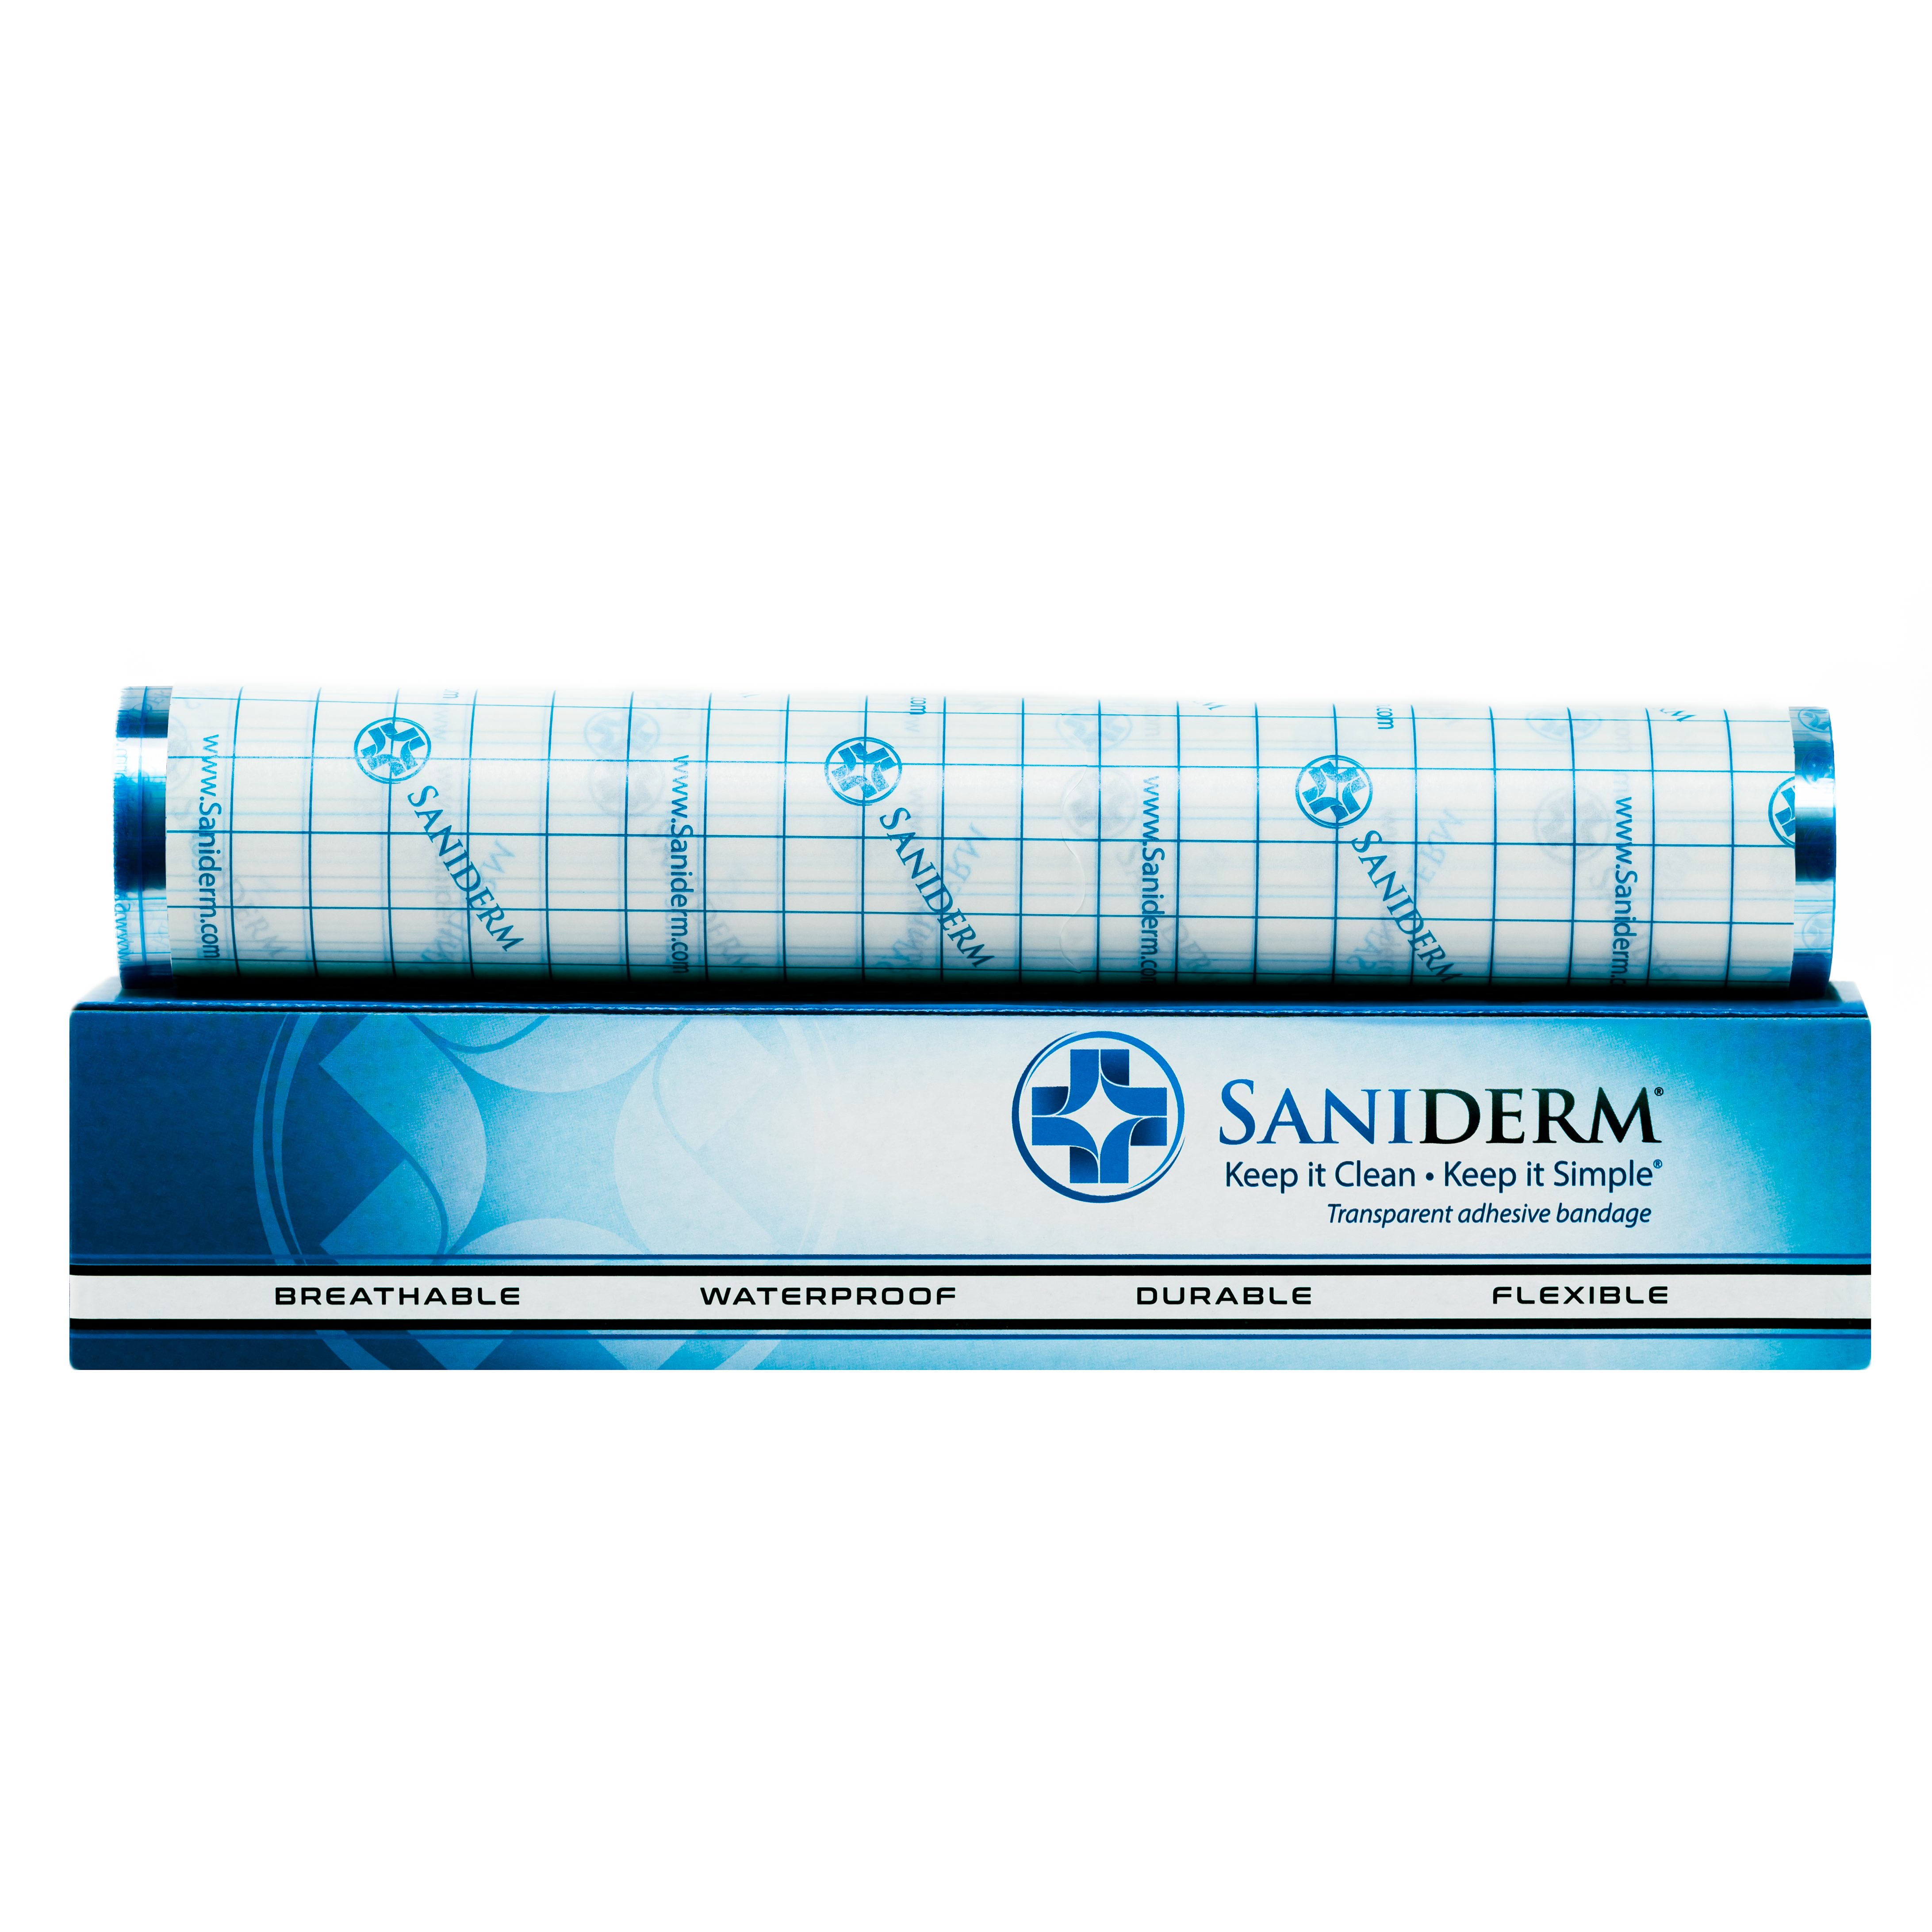 Saniderm Tattoo Aftercare Bandage, Heal Your Tattoo Faster, 1 Roll (10in x 2yd) - image 1 of 9